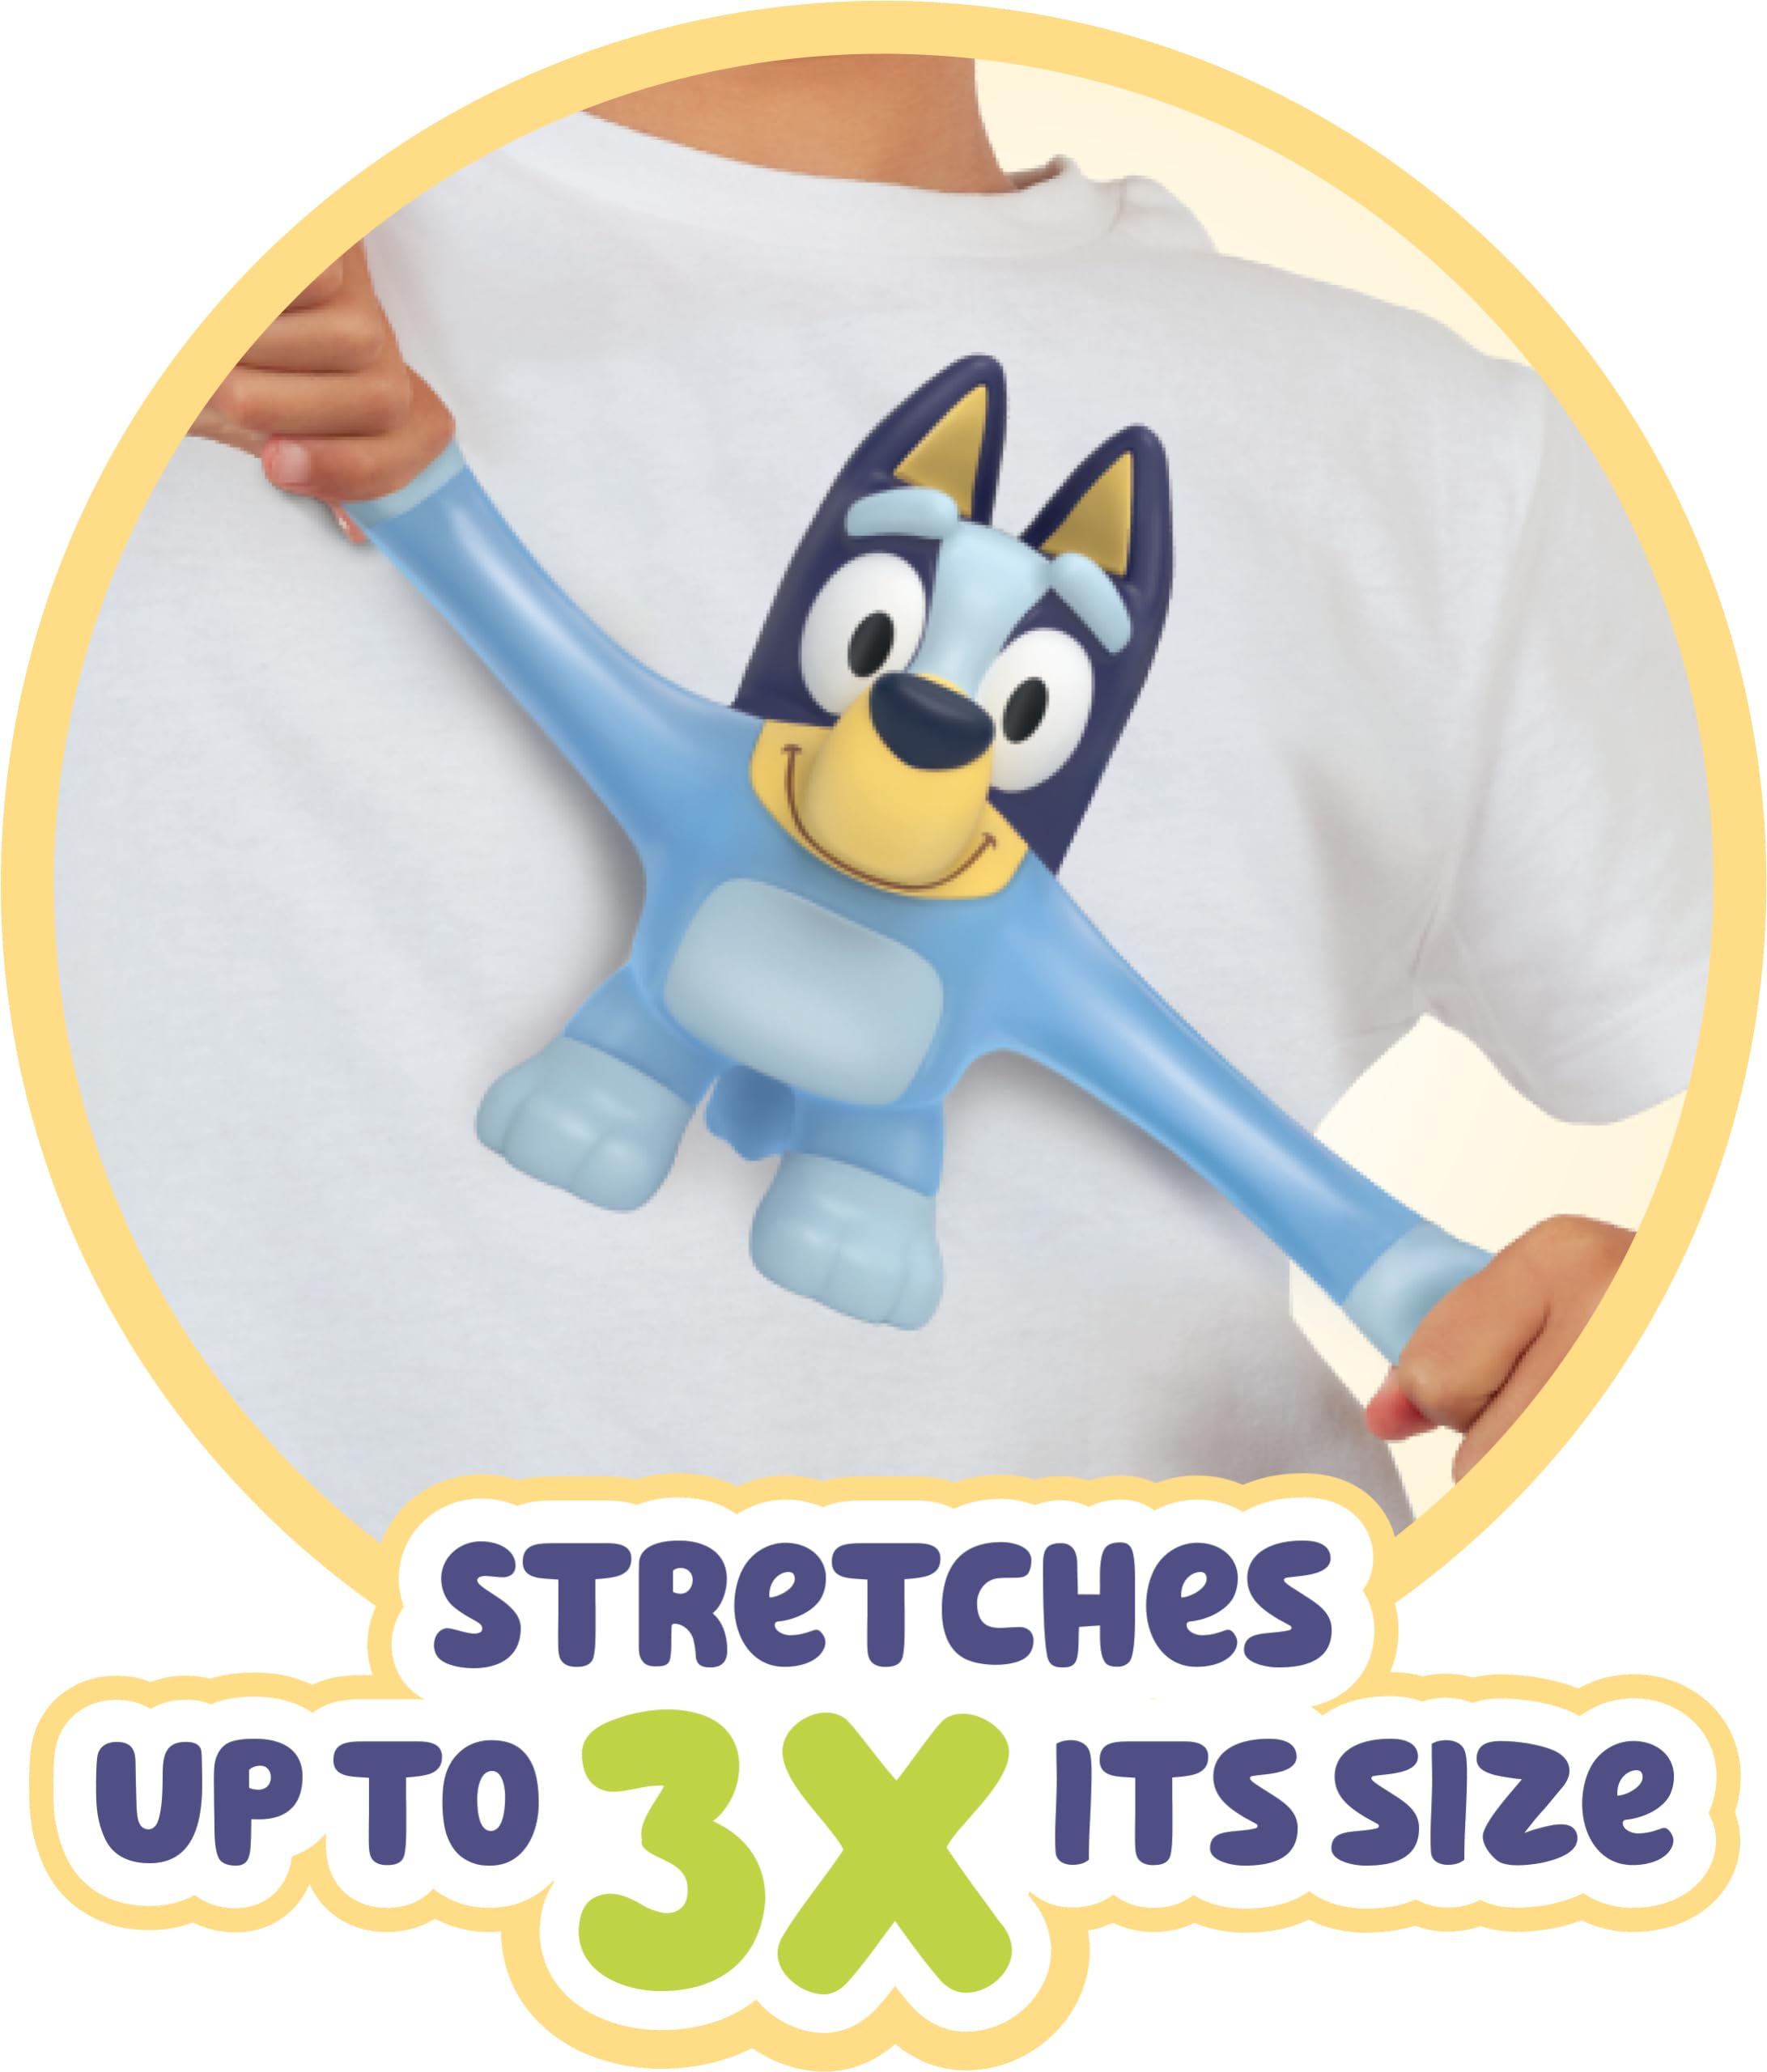 Stretchy Bluey | Super Stretchy Toy Figure of Bluey with Squishy Filling | Stretch Her Up to 3 Times Her Size